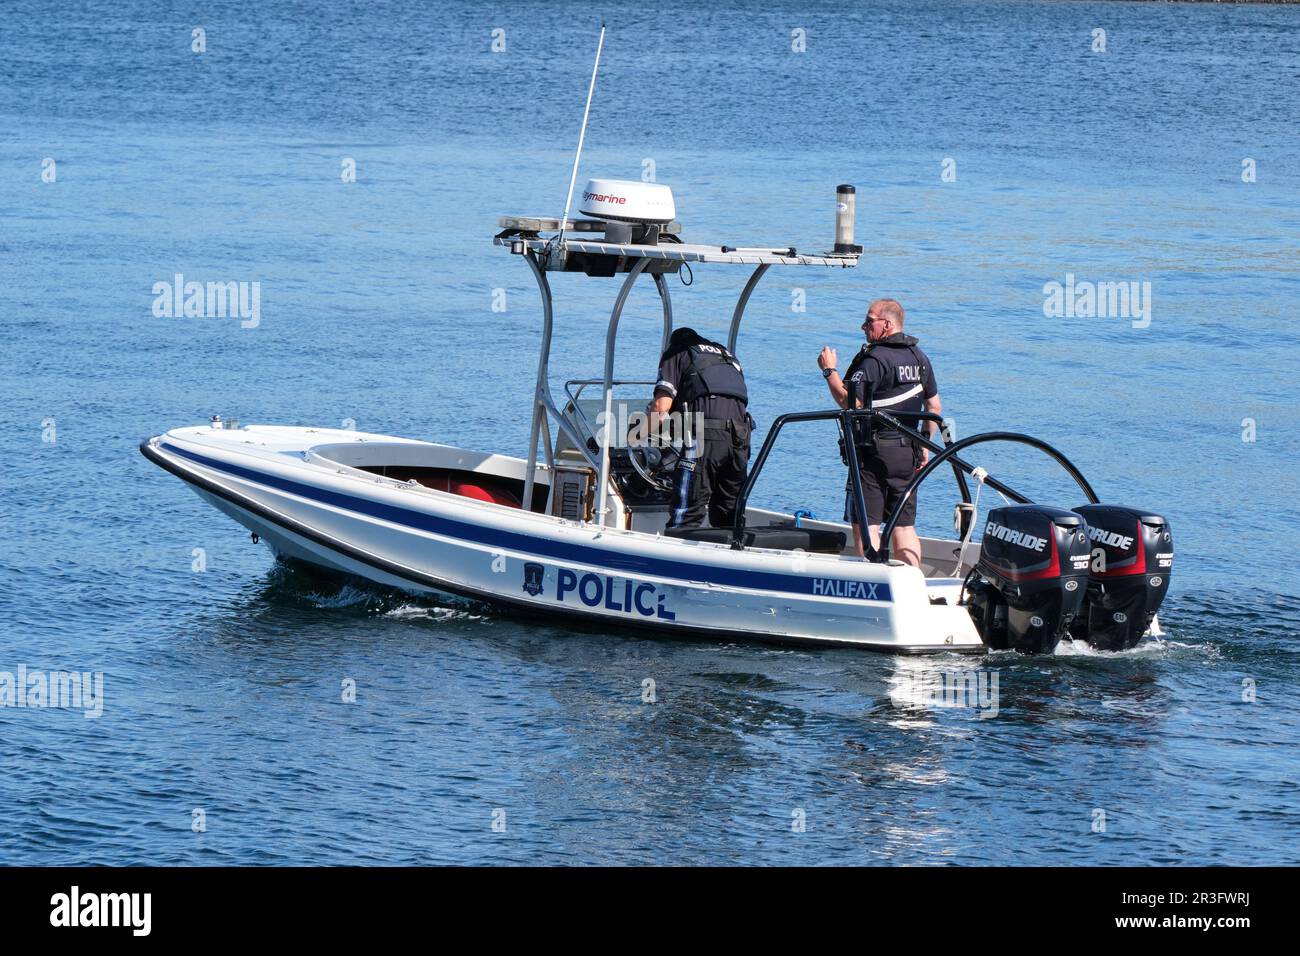 Halifax Police officers on the city Police boat in the harbour Stock Photo